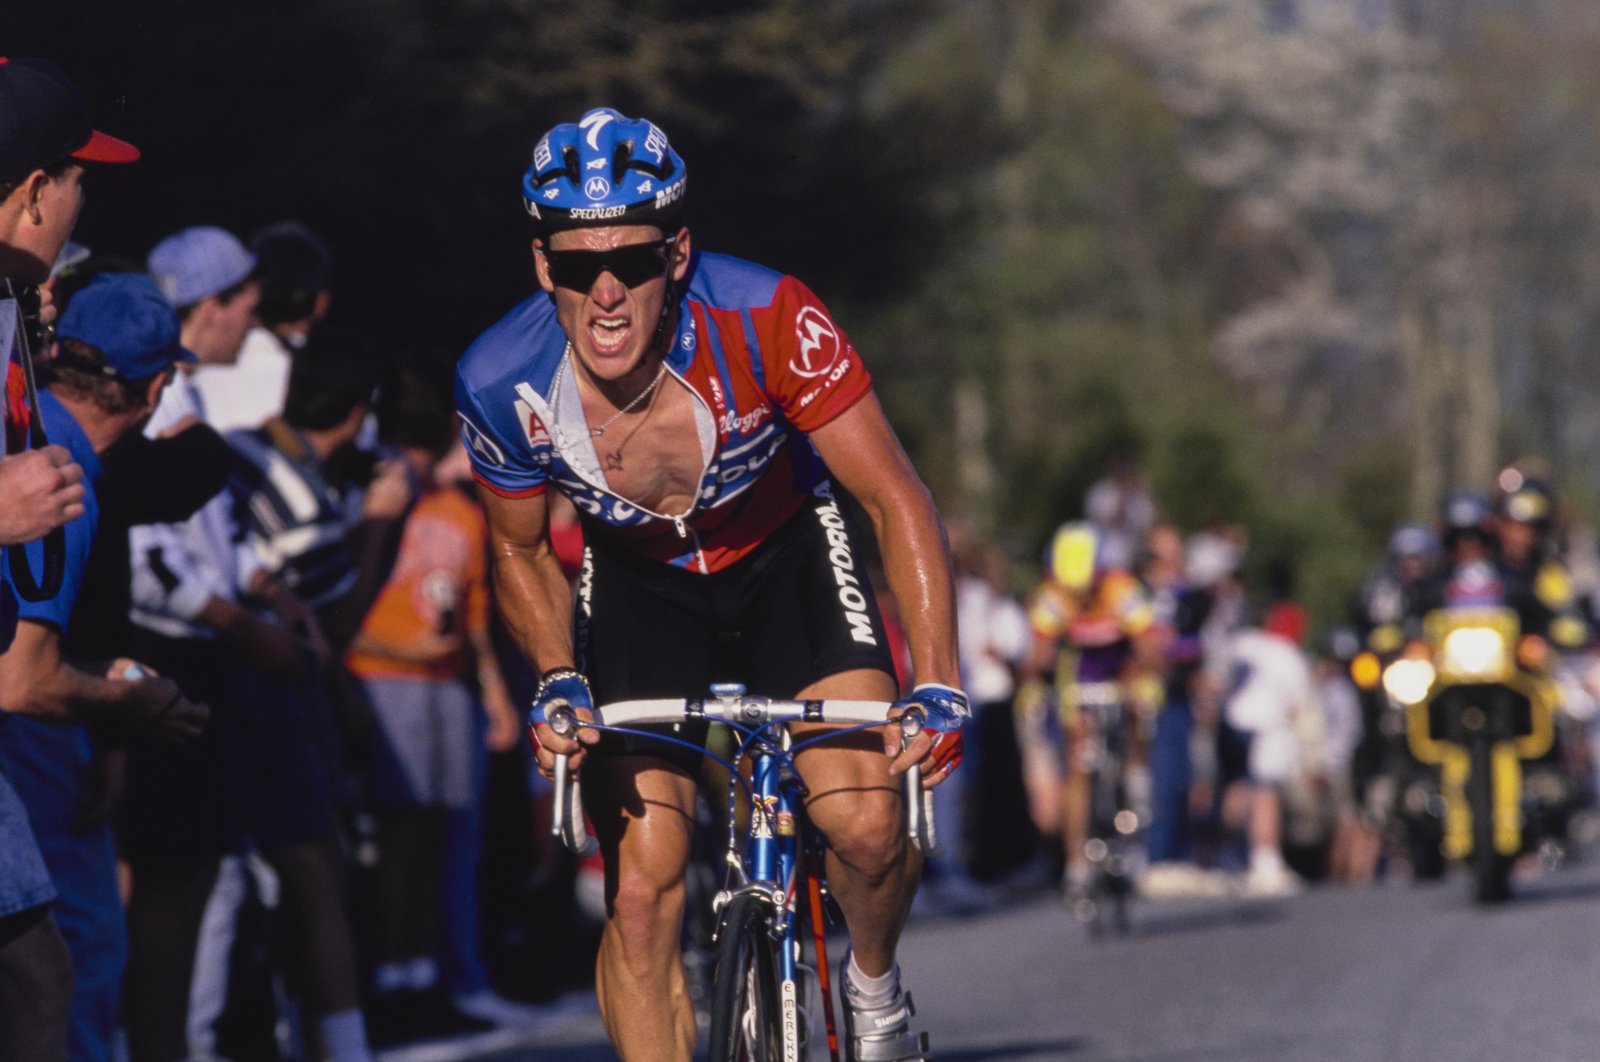 US&#039; Lance Armstrong riding for the Motorola Cycling Team climbs Beech Mountain during Stage 9 of the Tour DuPont cycling stage race at Beech Mountain, North Carolina, U.S., May 15, 1993. (Getty Images Photo)